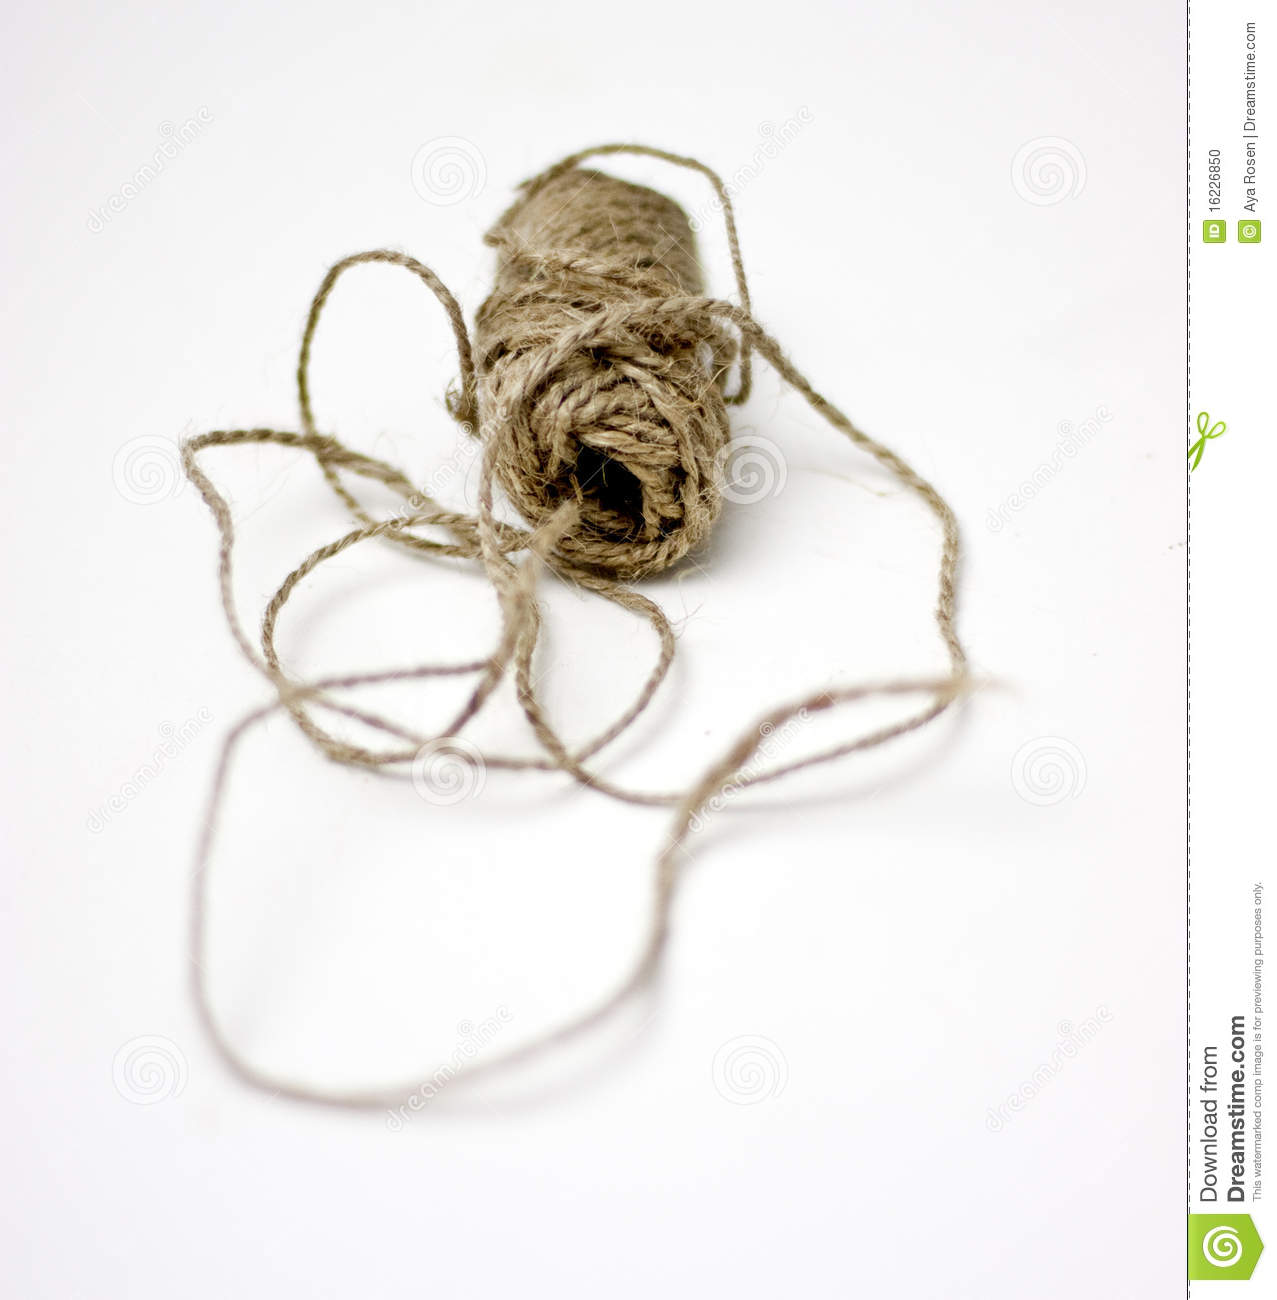 More Similar Stock Images Of   A Piece Of String